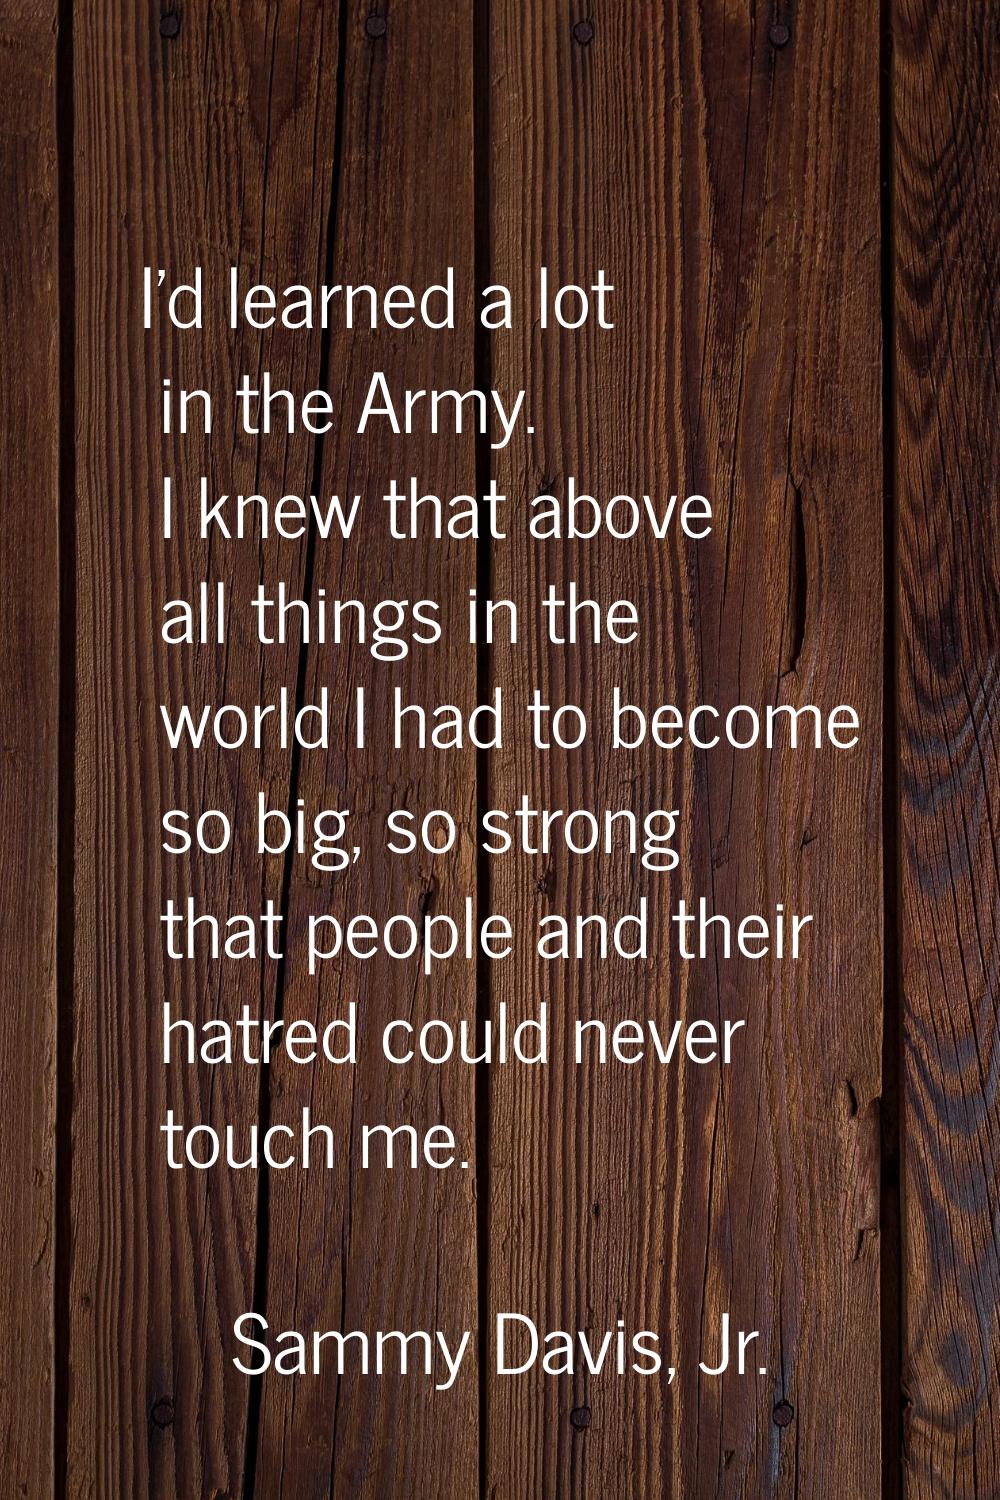 I'd learned a lot in the Army. I knew that above all things in the world I had to become so big, so